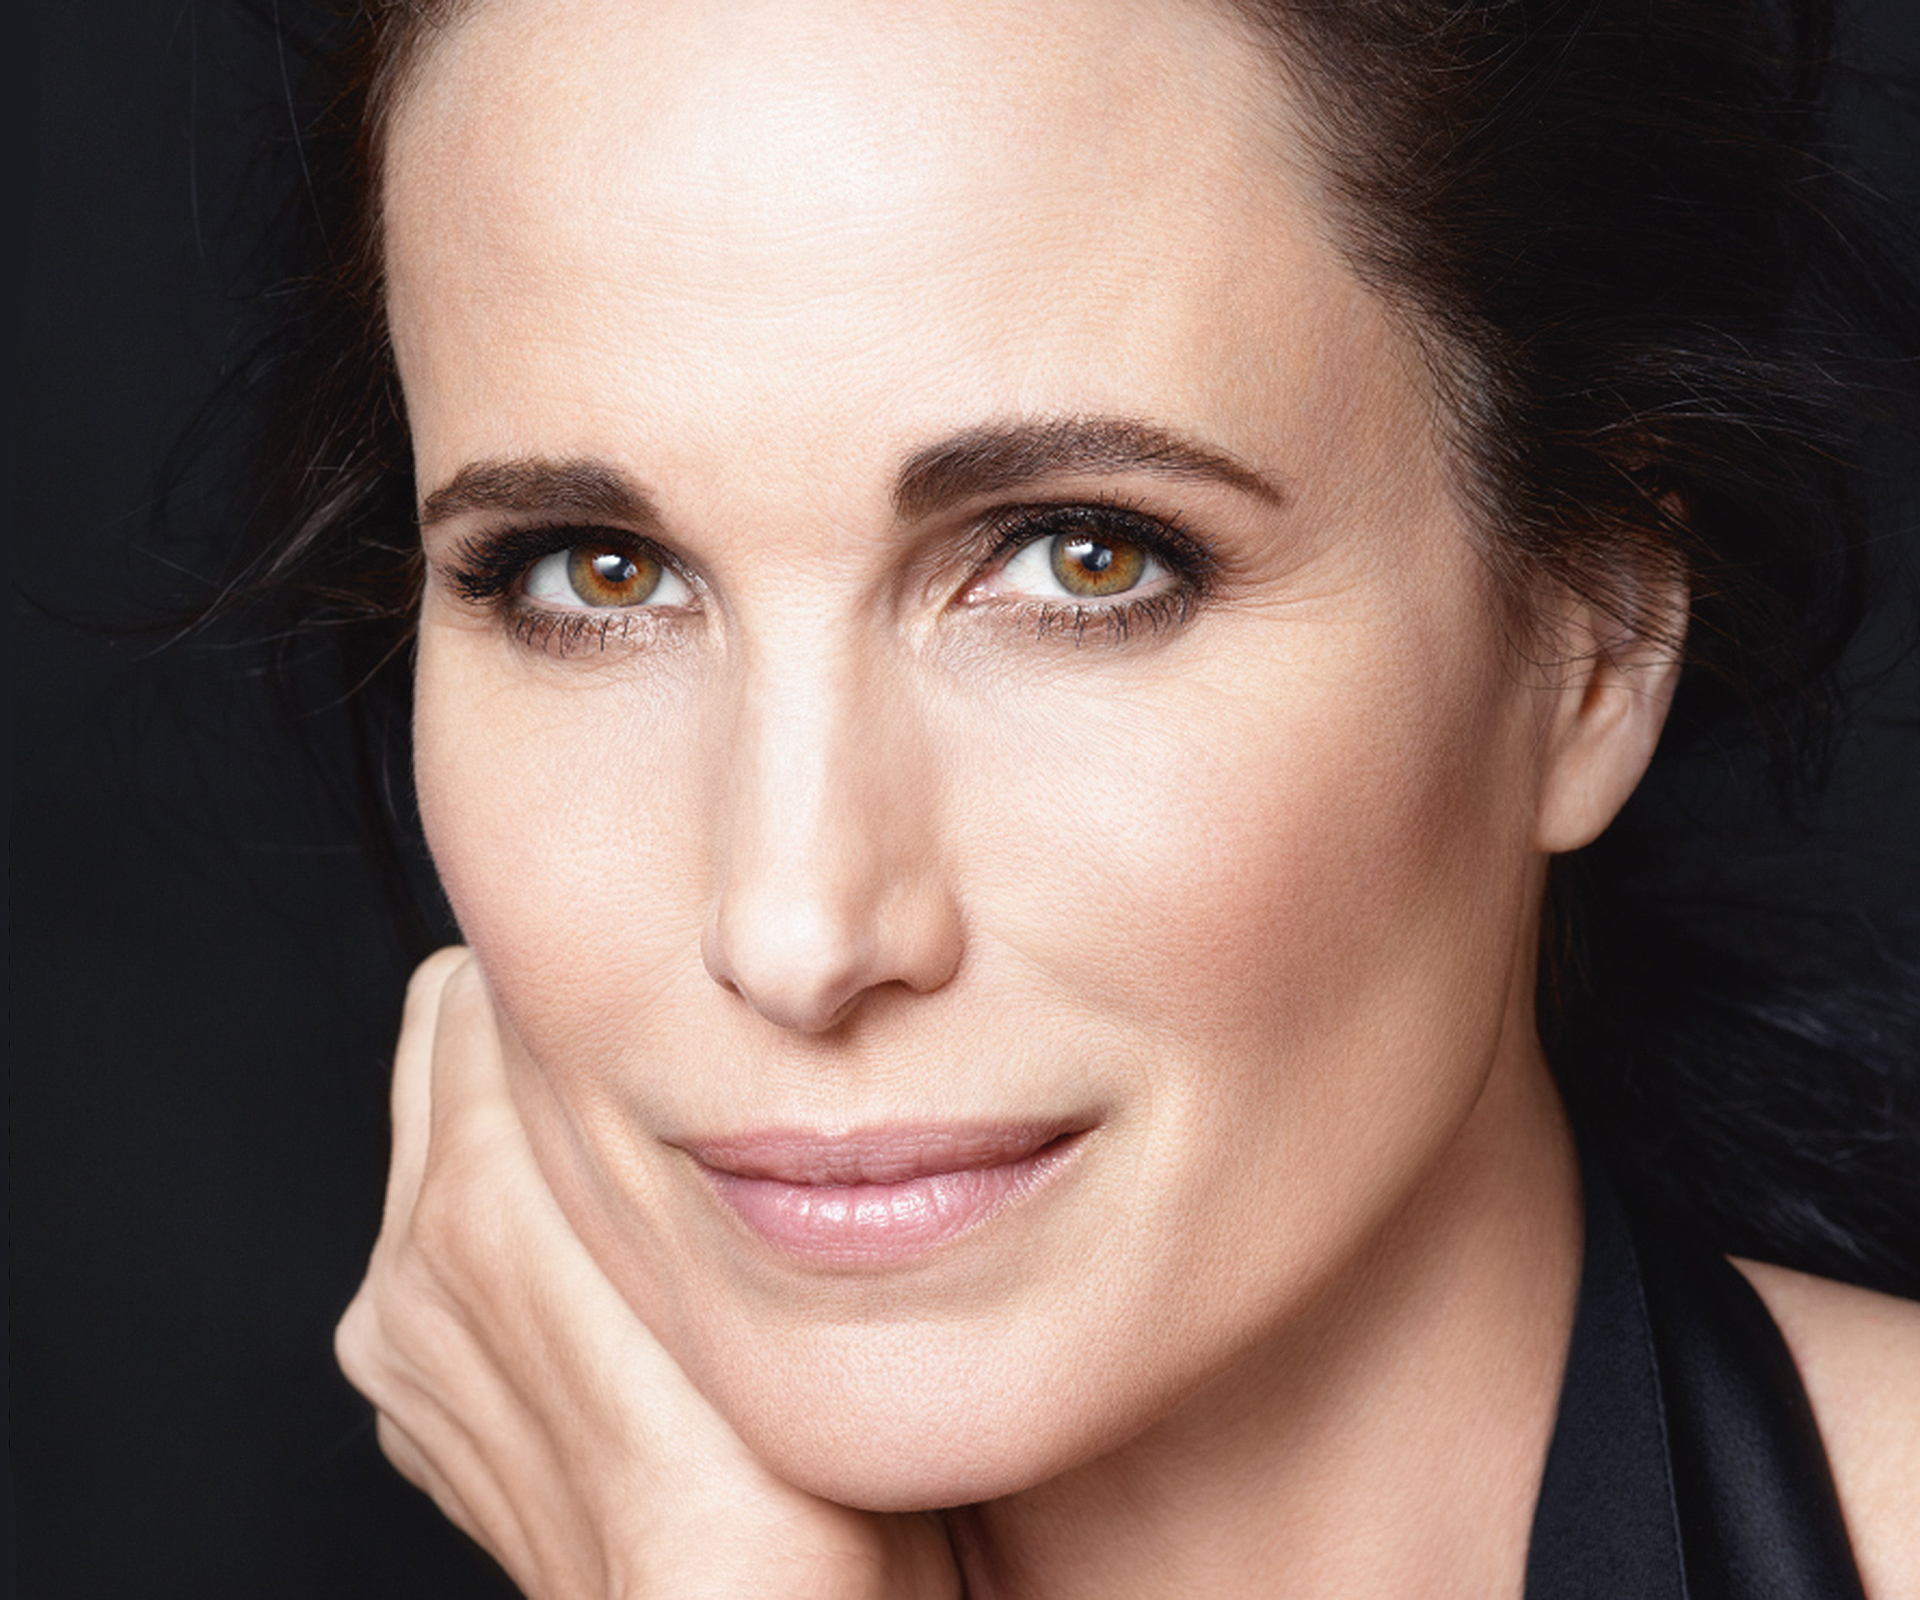 Andie Macdowell in L'Oreal Revitalift campaign 